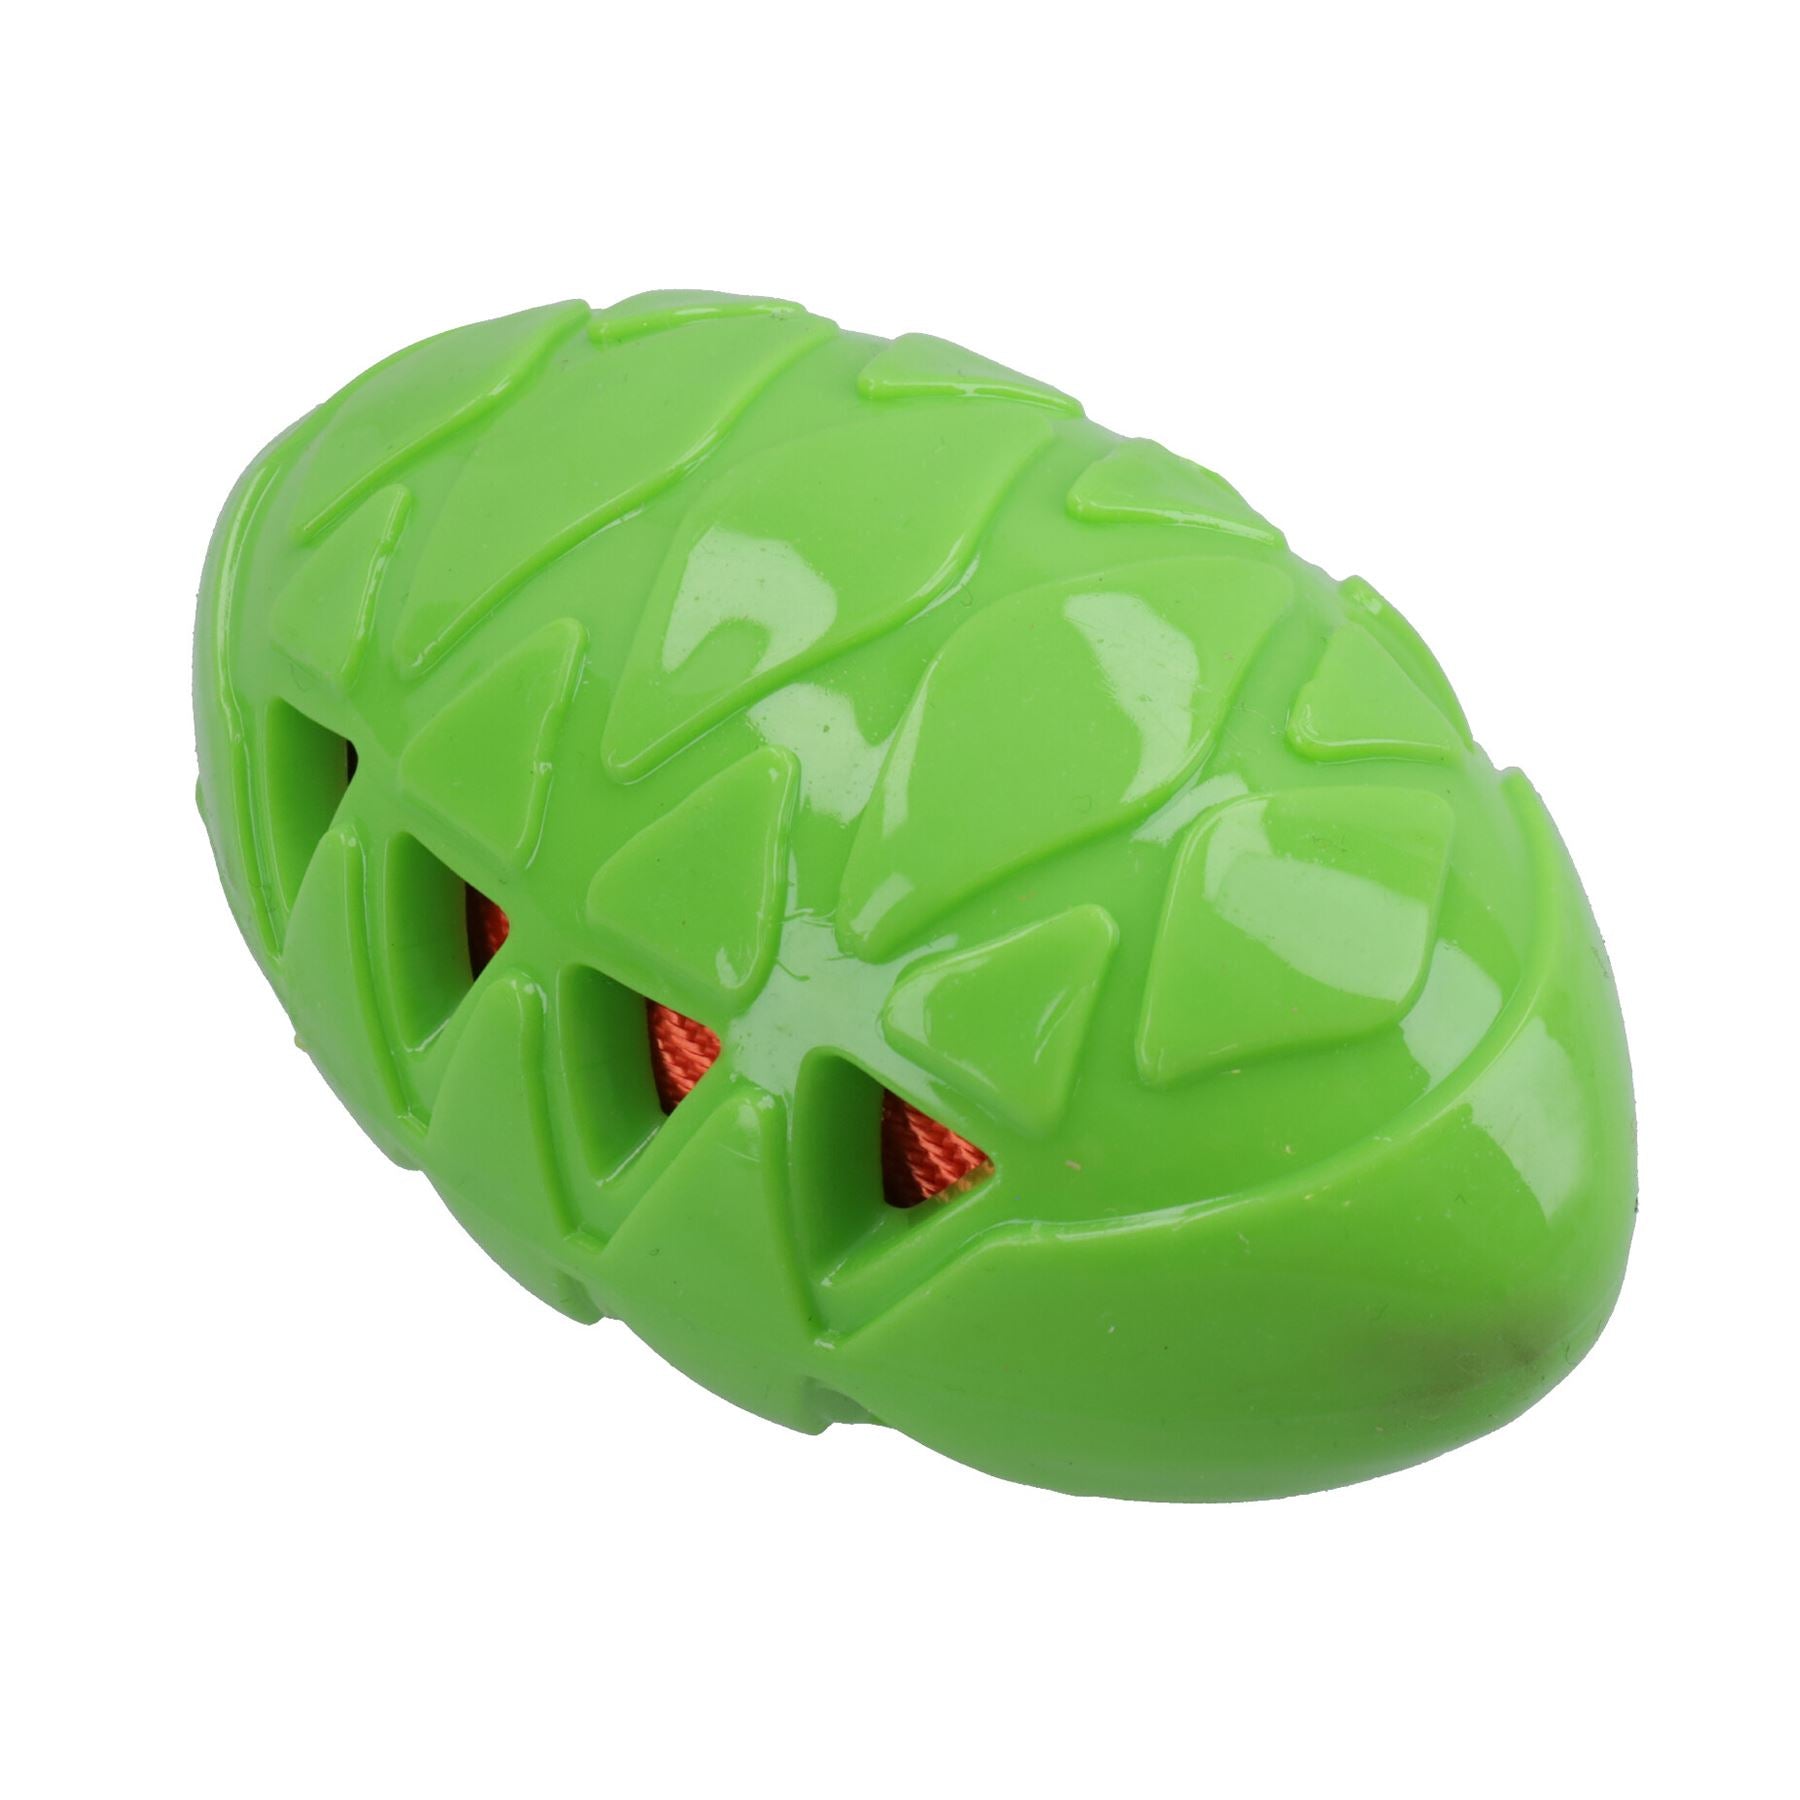 Mini Tough Crunch Rugby Ball Small Dogs Play Time Toy Dog Gift 9cm